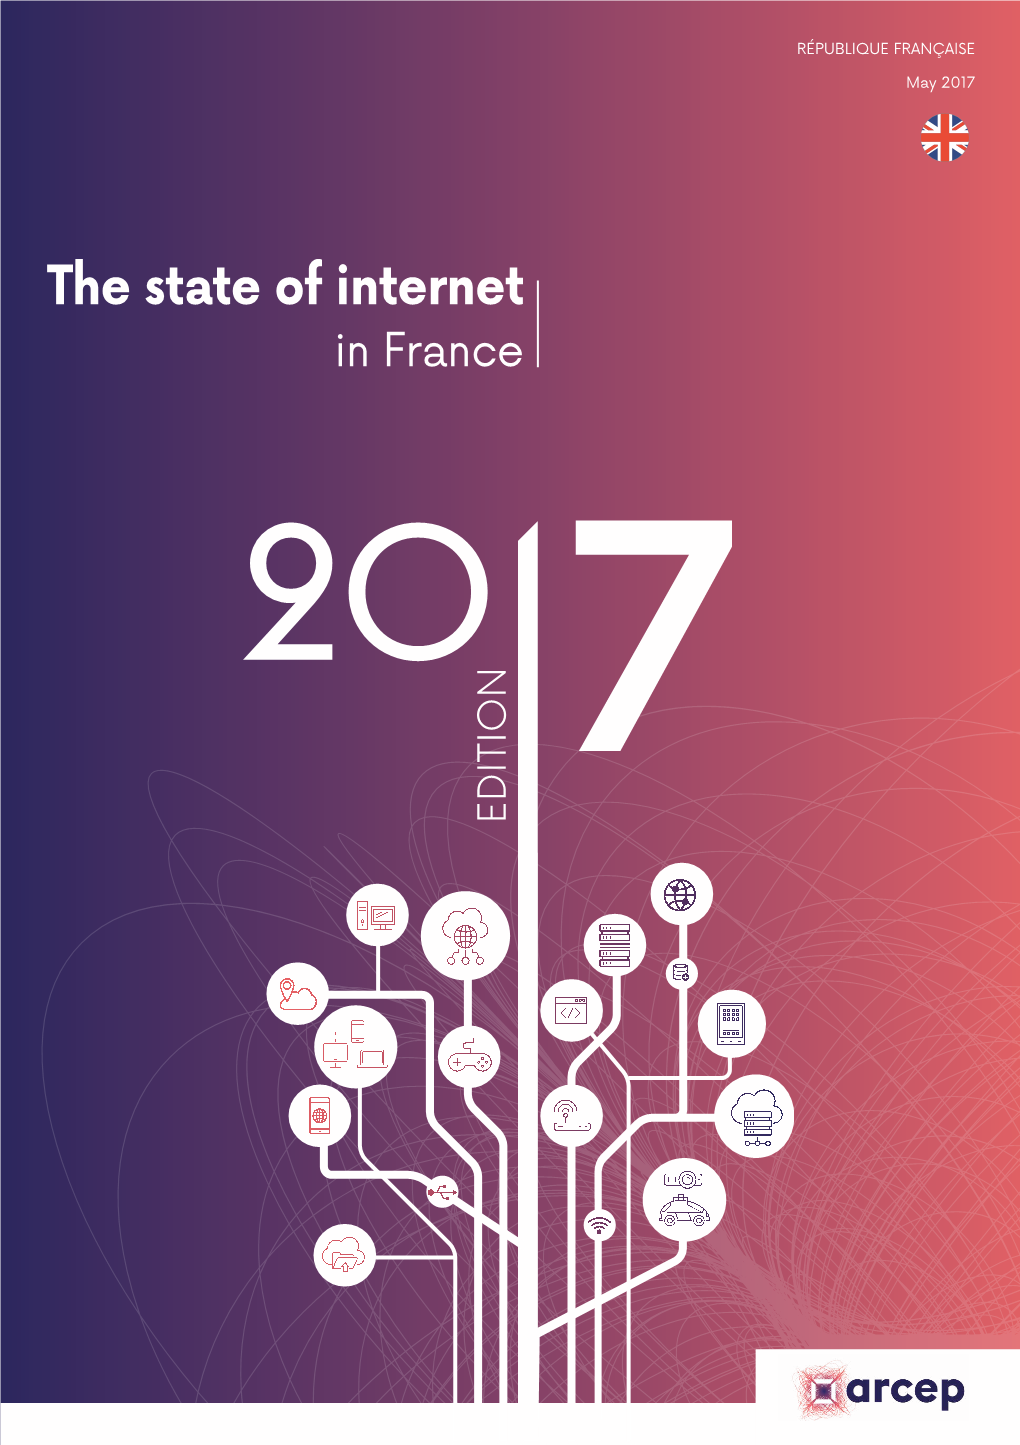 The State of Internet in France EDITION the Statel’État of Internetd’Internet Rapport D’Activité in Franceen France Tome 3 EDITION Contents